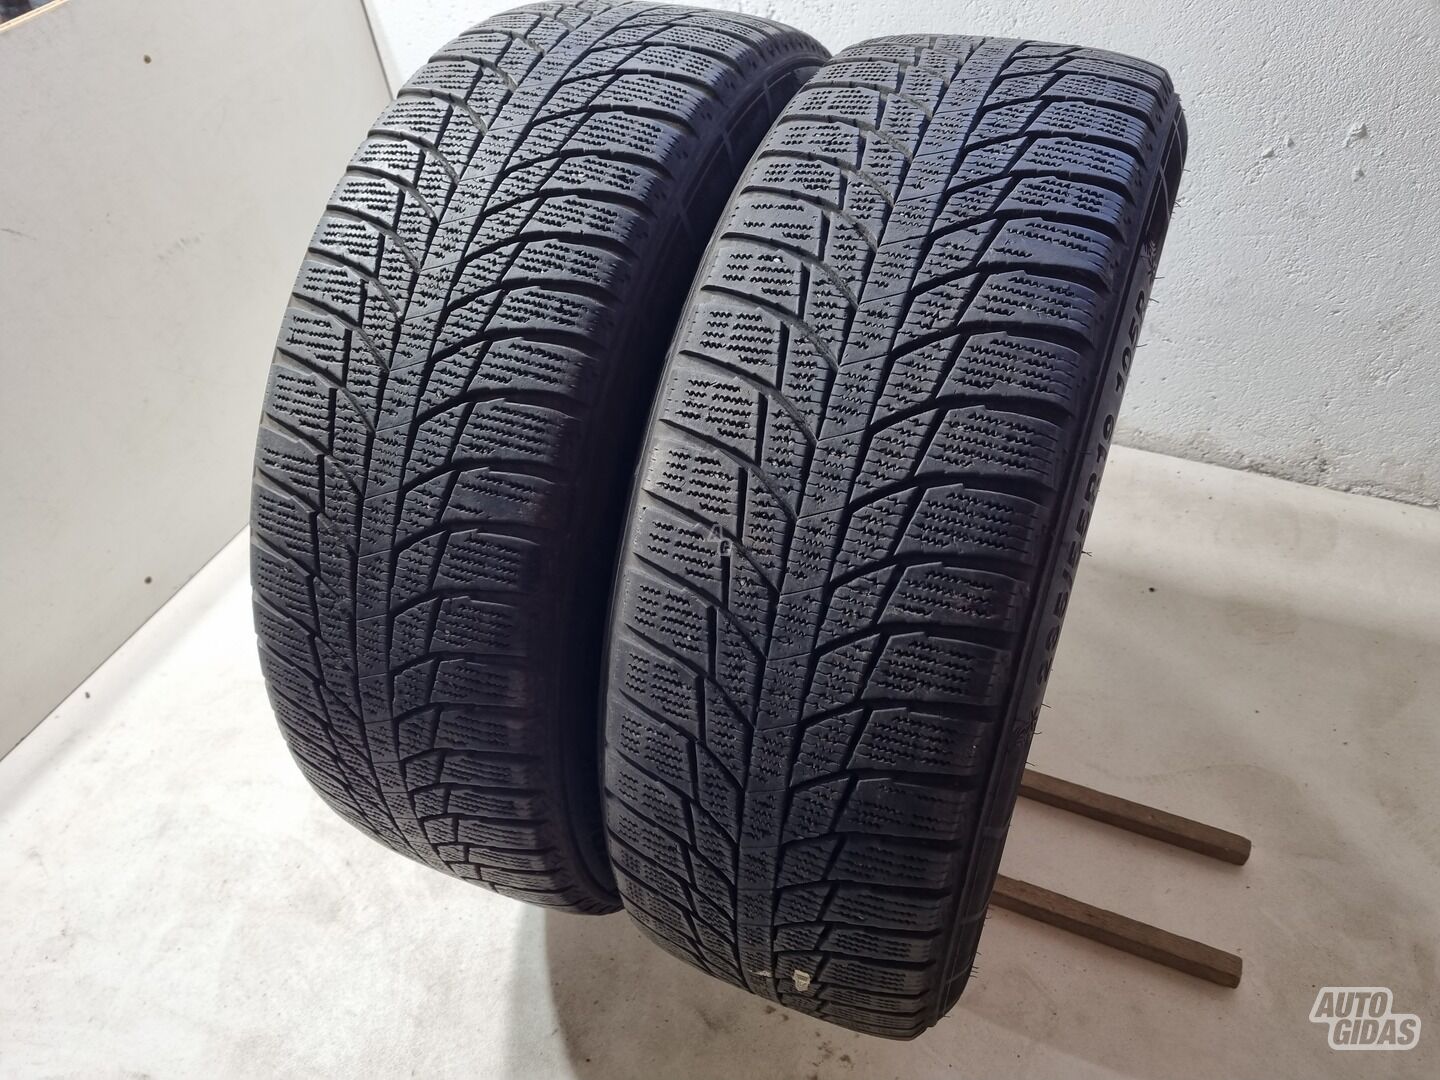 Triangle 6-7mm, 2021m R19 winter tyres passanger car